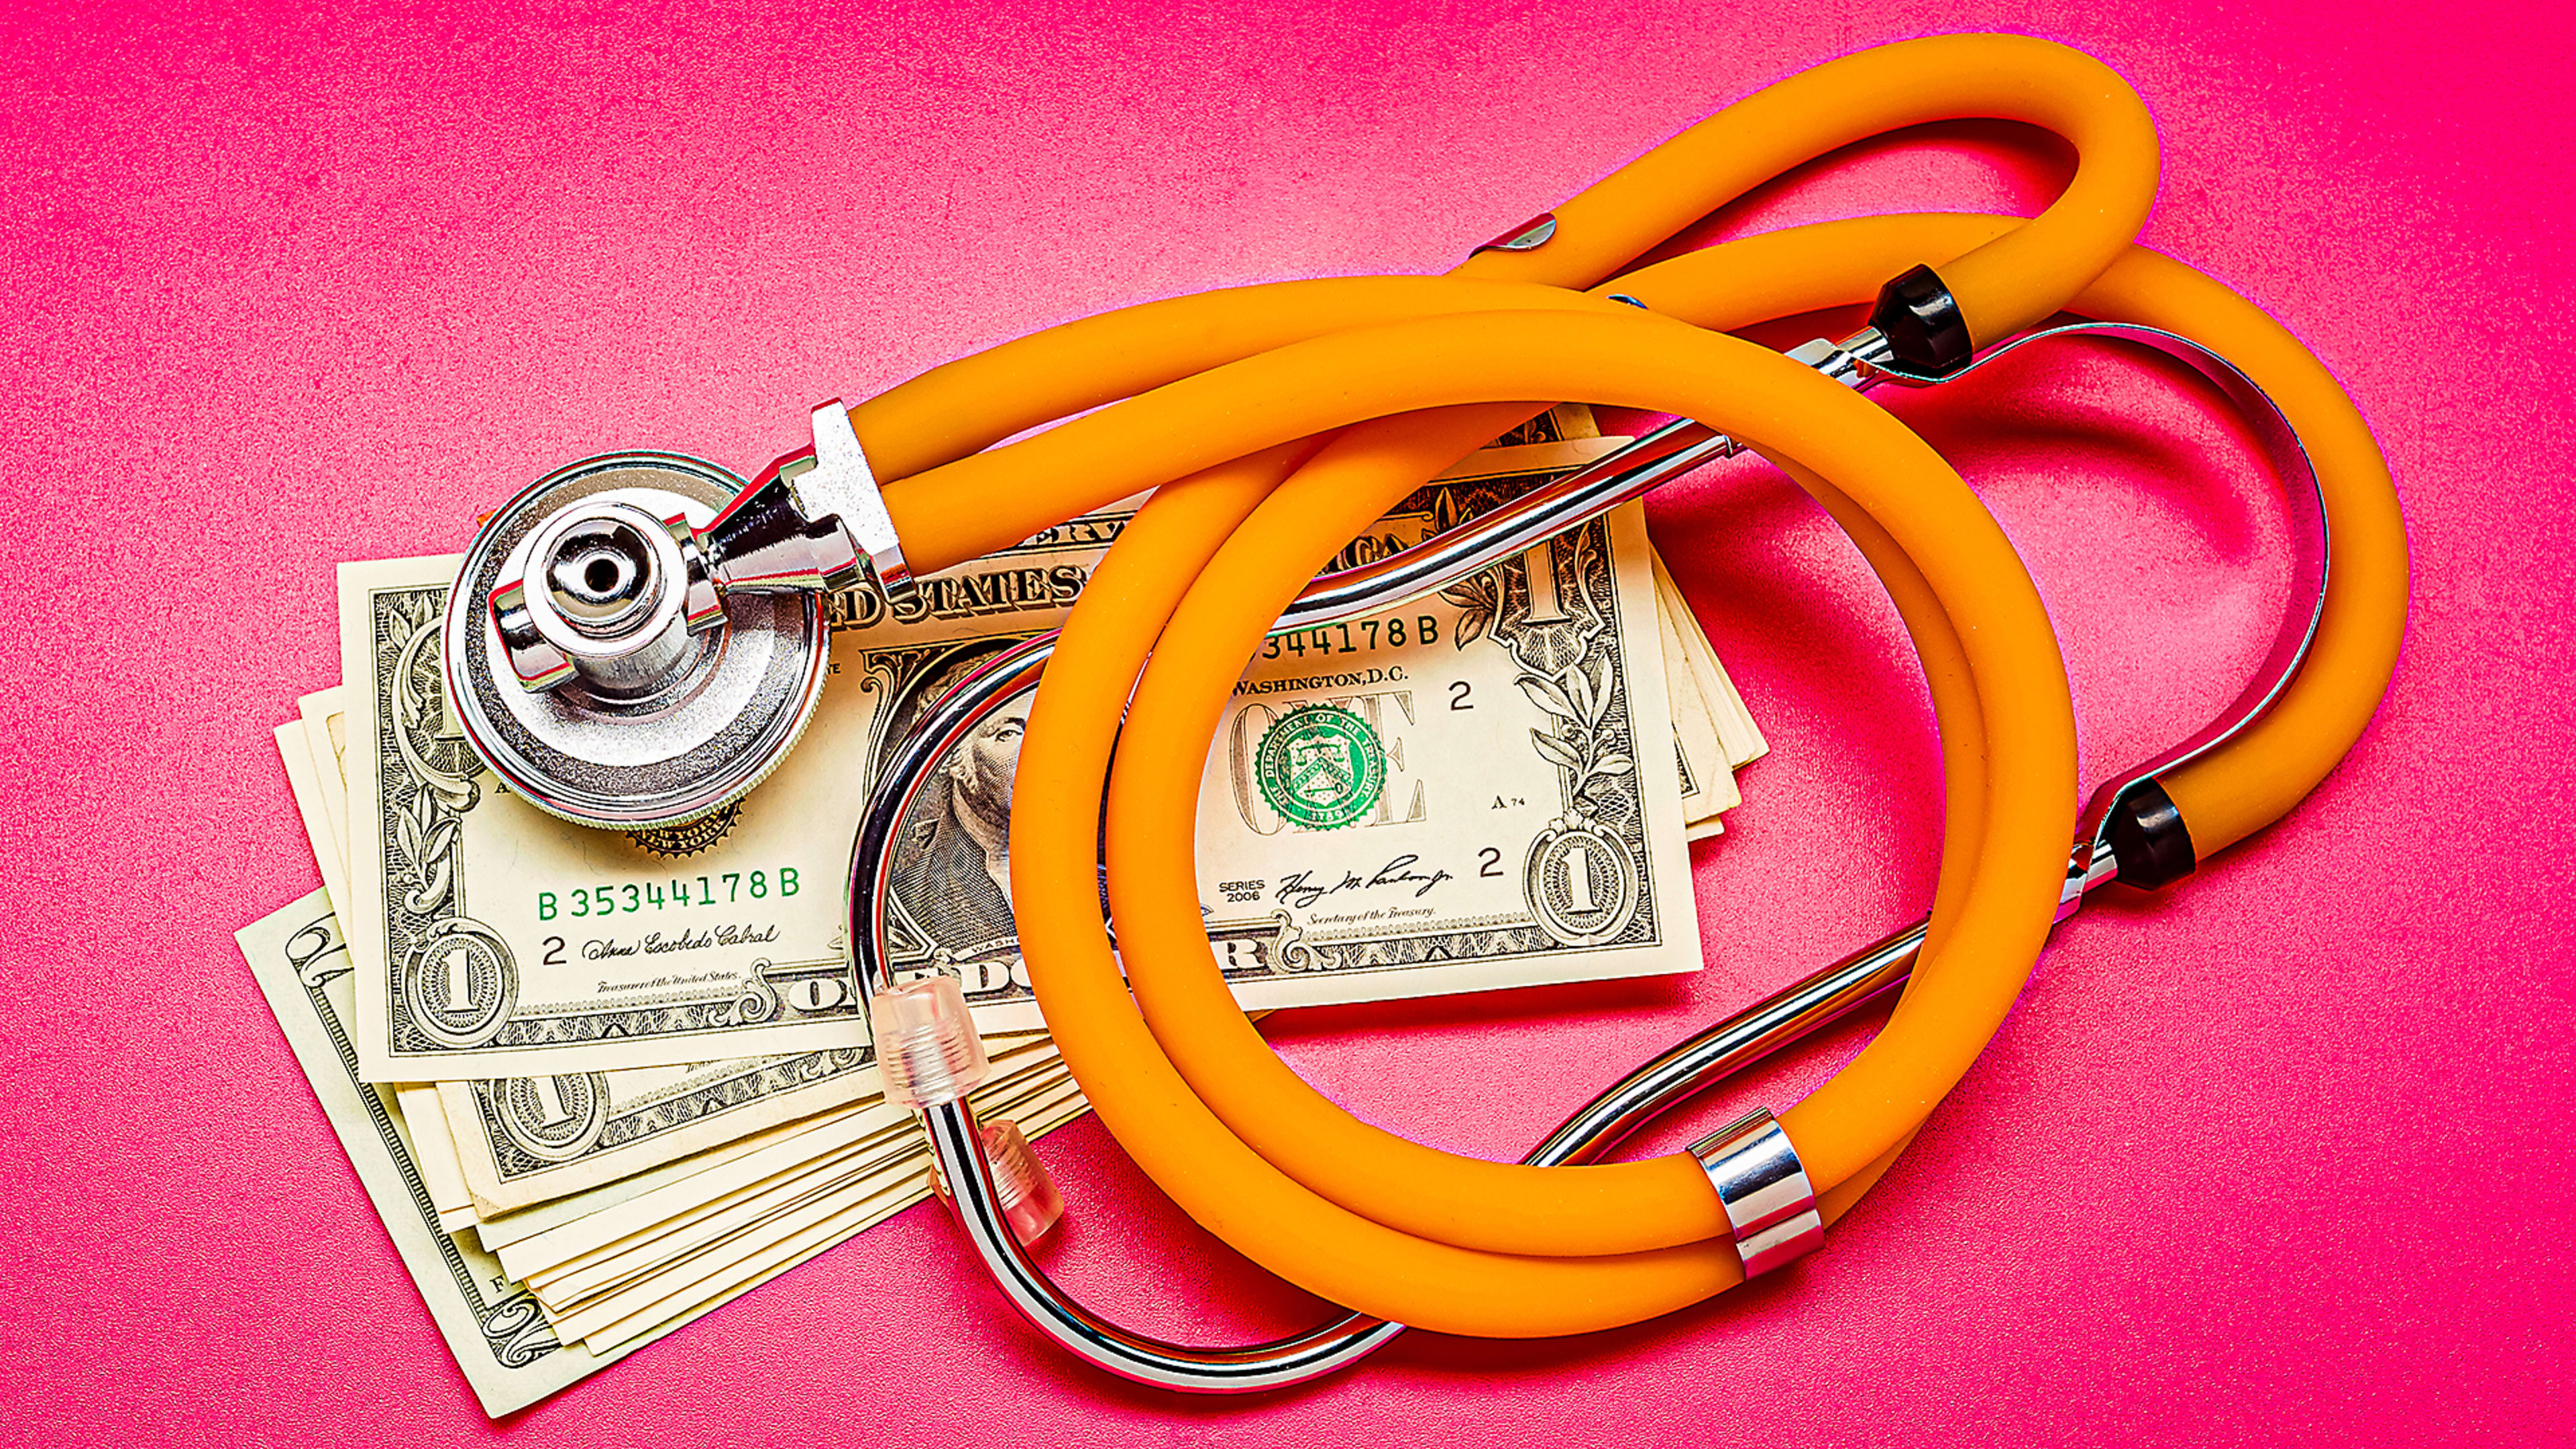 Surprise medical bills are banned starting January 1: Here’s what to know